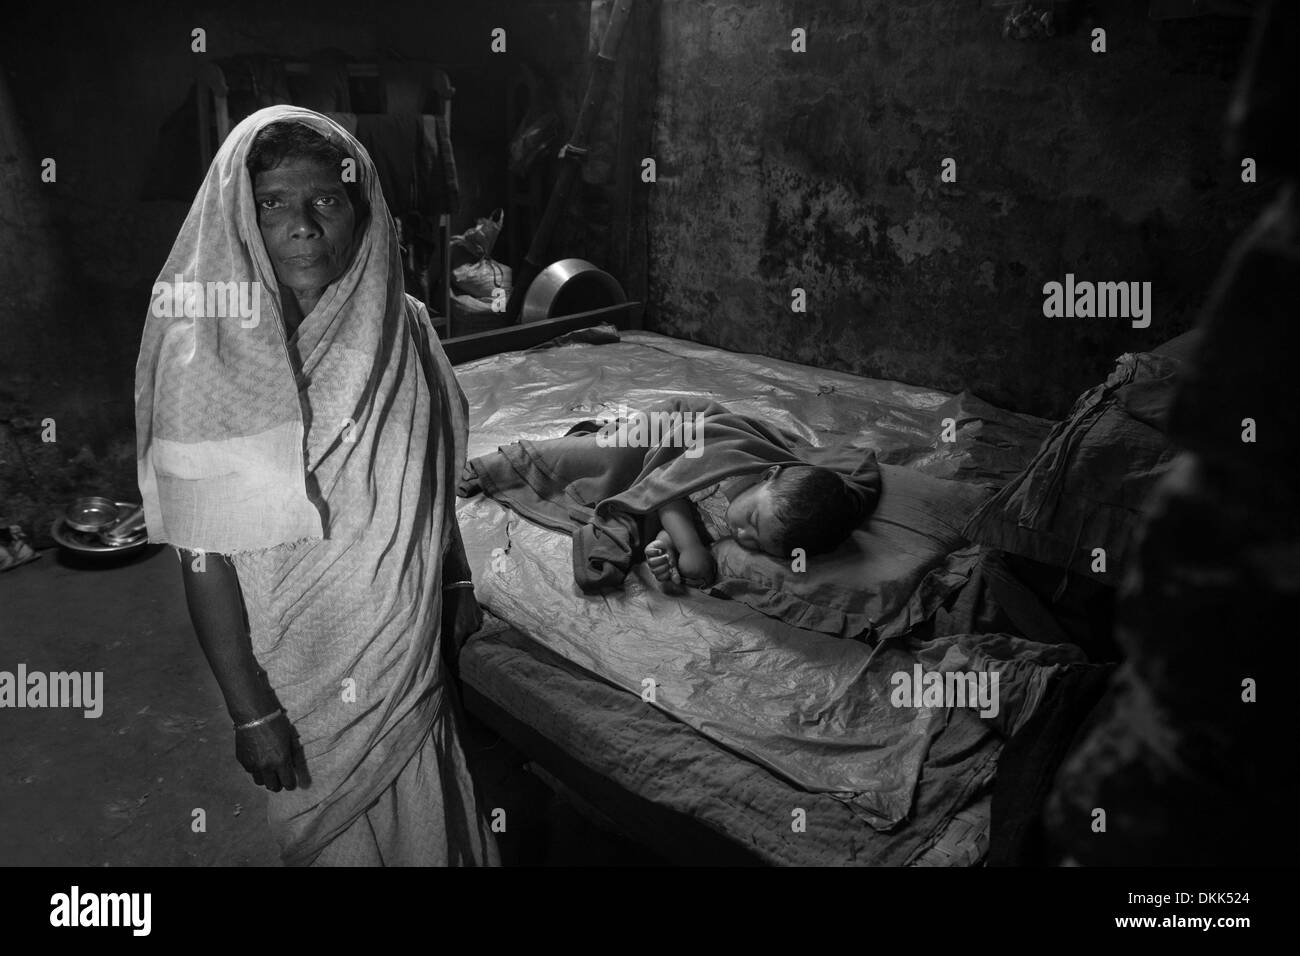 Rangpur, Bangladesh. 30th March, 2013. A Bihari mother stands next to her sleeping grandchild in Bangladesh. Her home was recently damaged from a fire but she has no money to repair it. 42 years after the 1971 war there are still an estimated 600,000 Biharis (also known as 'stranded Pakistanis') living in Bangladesh - mostly still in camps. © Hanna Adcock/ZUMA Wire/ZUMAPRESS.com/Alamy Live News Stock Photo